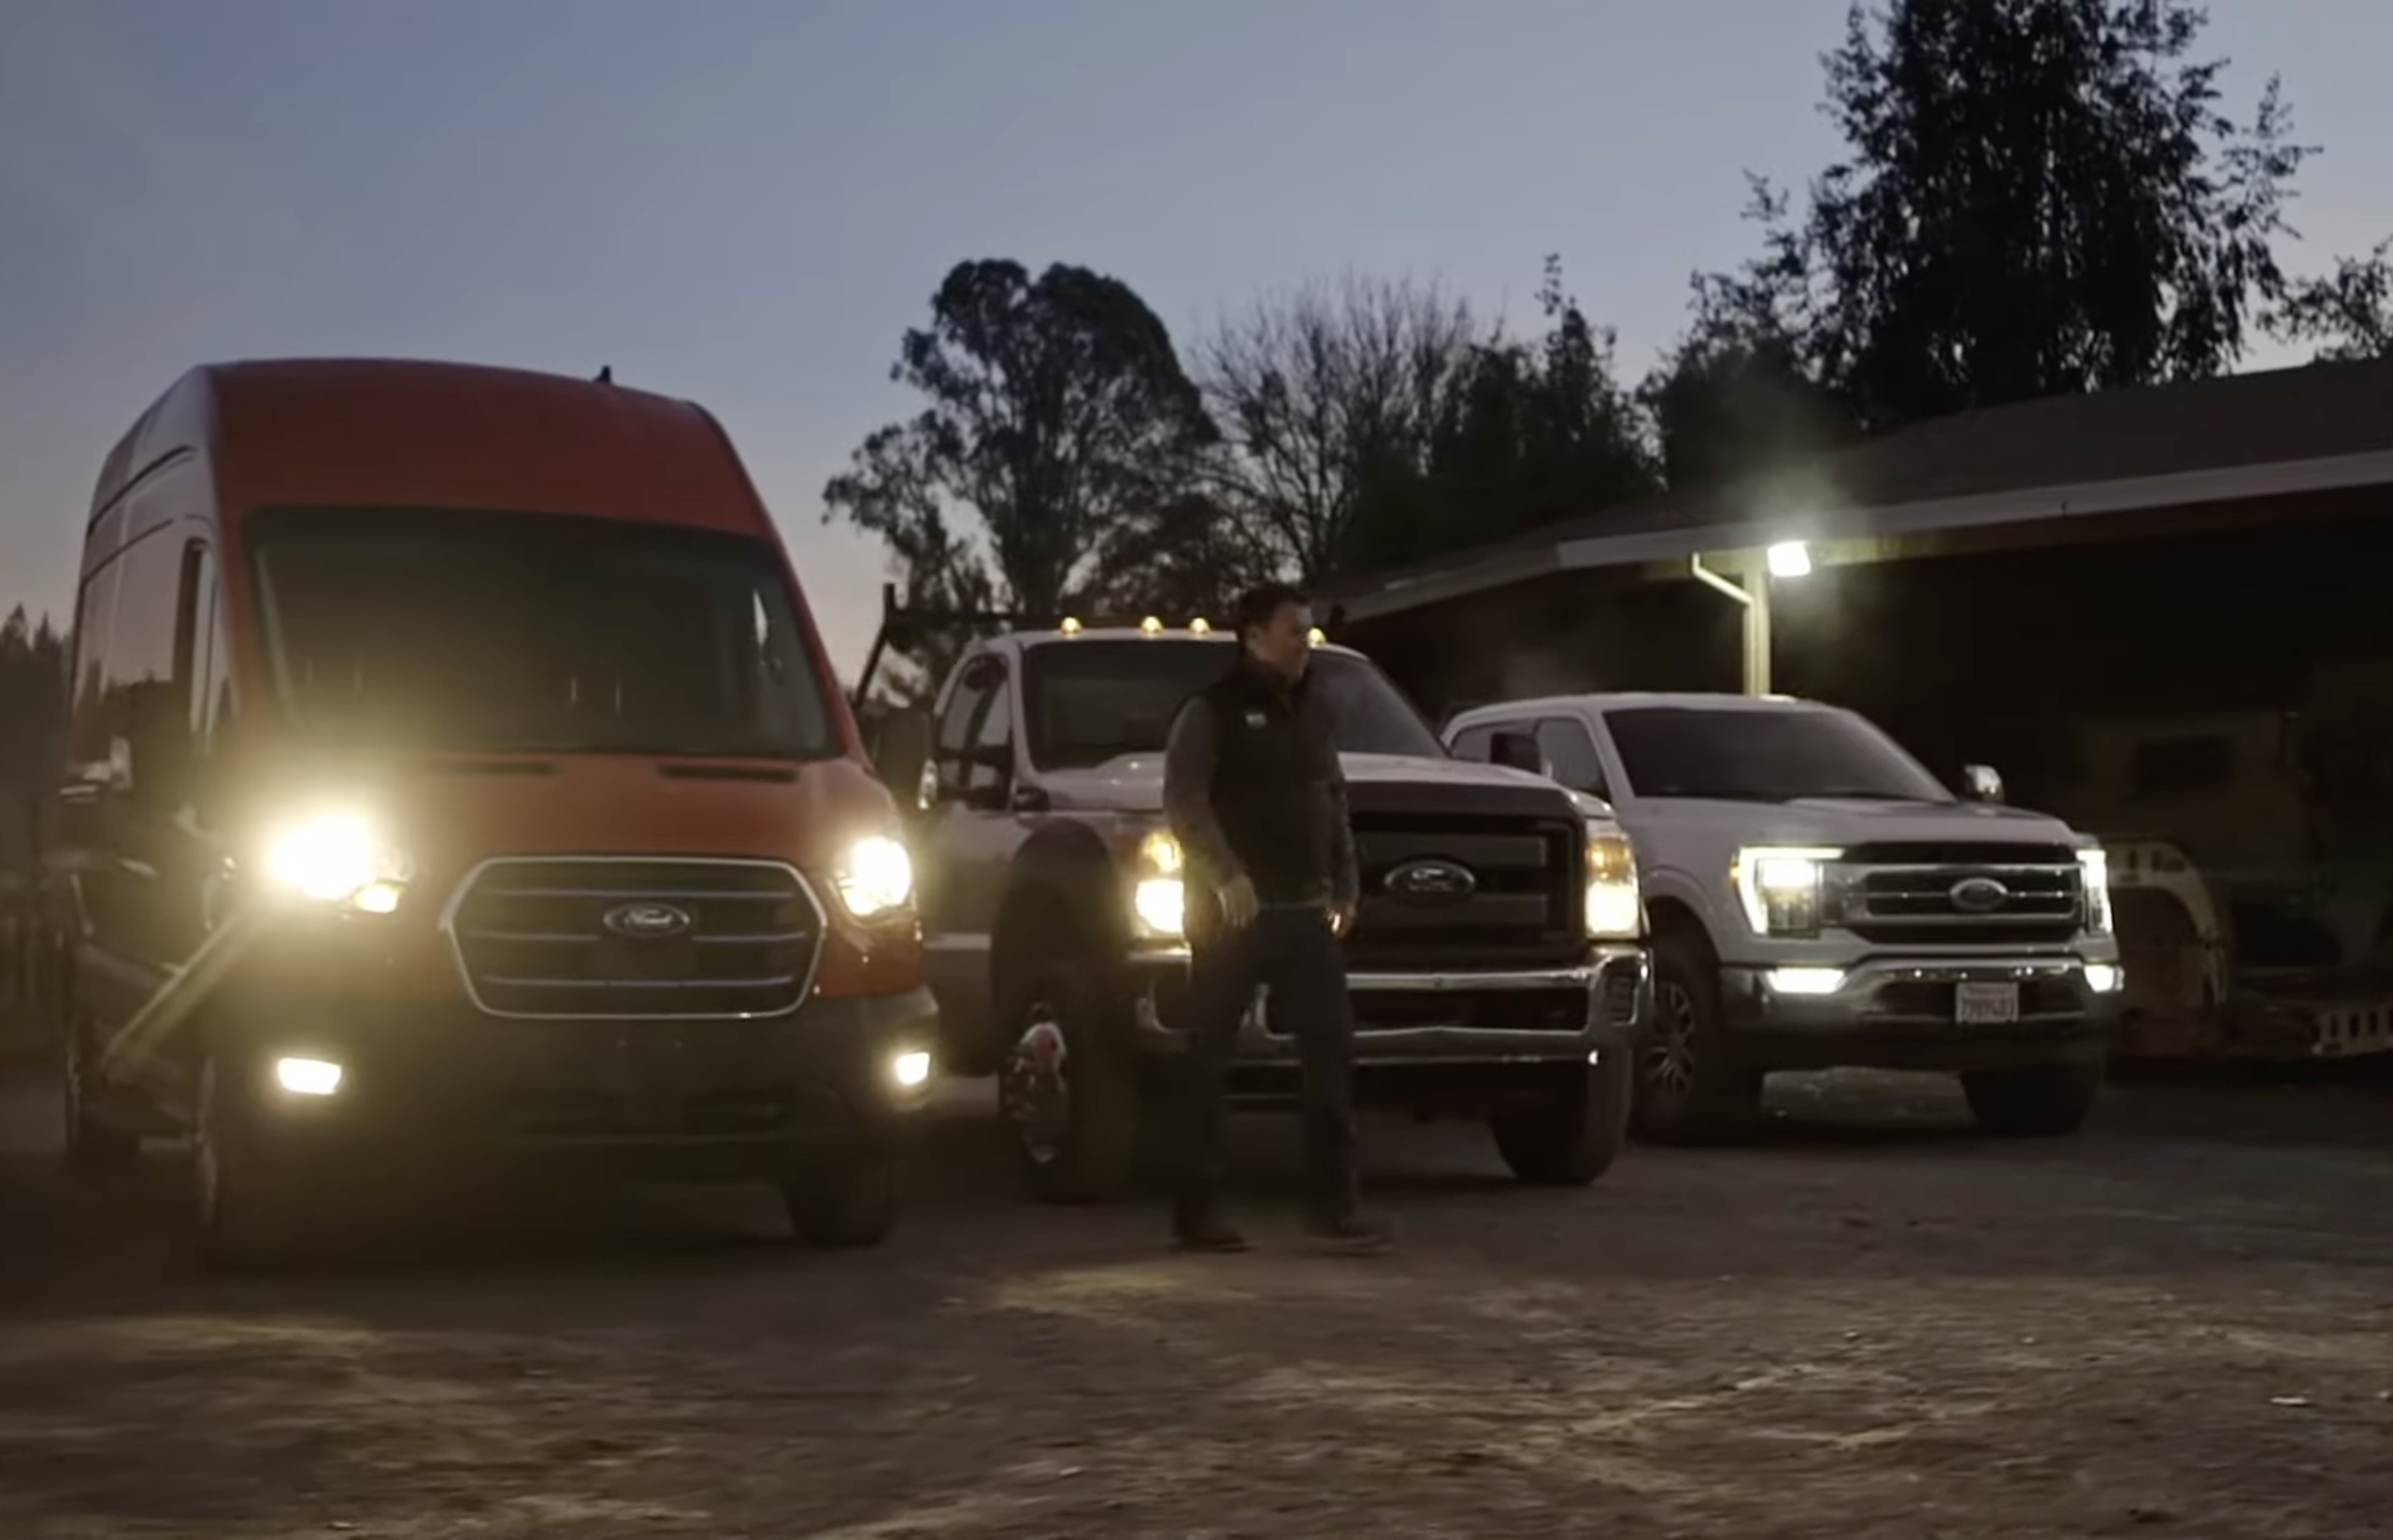 Ford Pro Insure for commercial vehicles expands to Indiana & Wisconsin